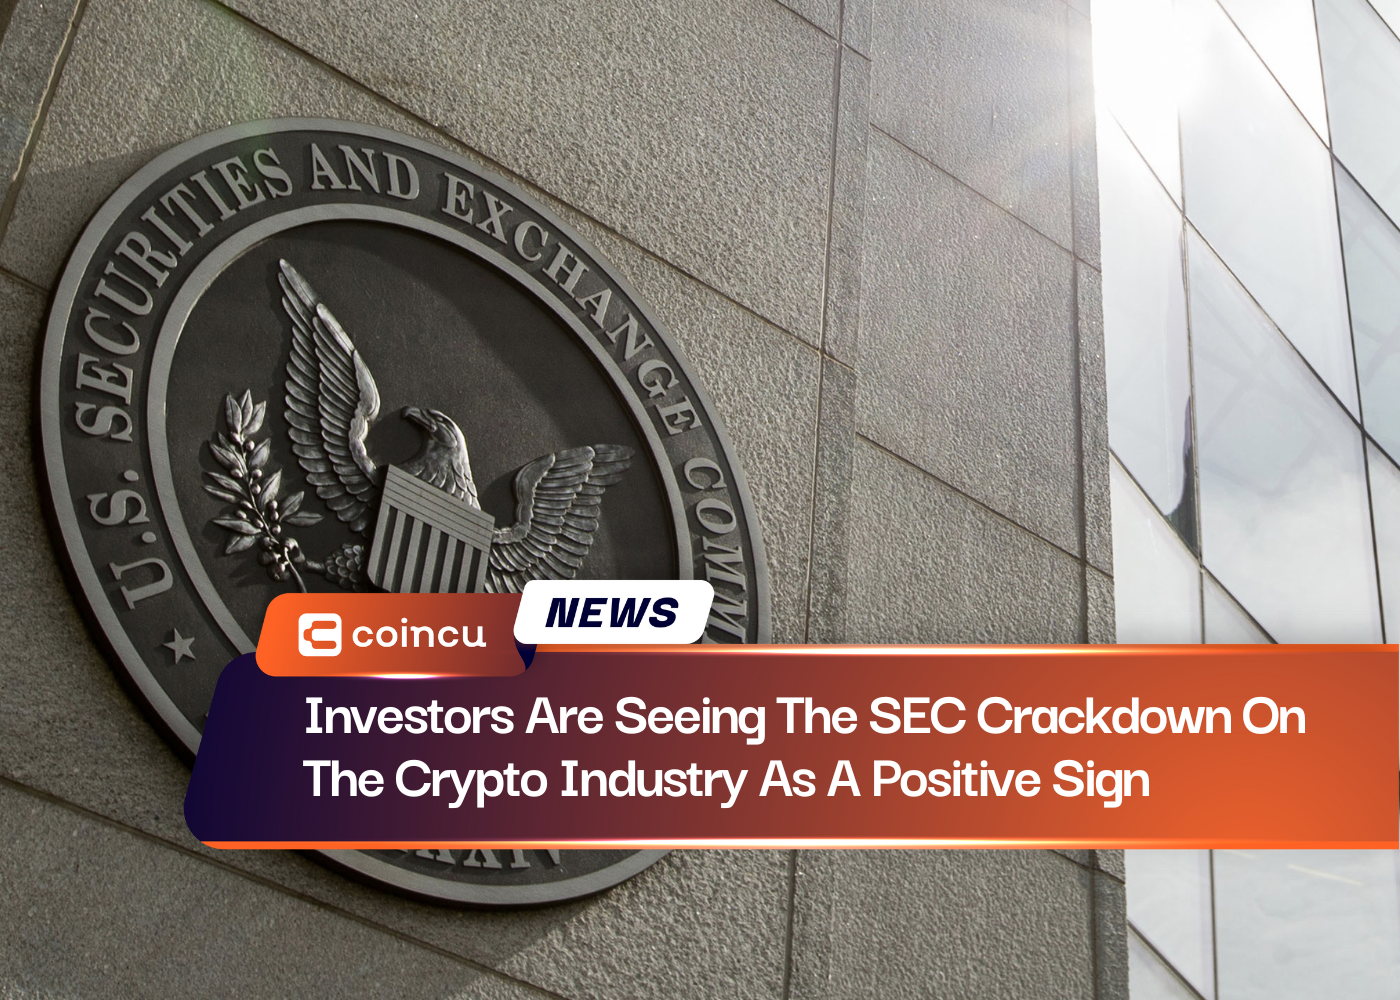 Investors Are Seeing The SEC Crackdown On The Crypto Industry As A Positive Sign